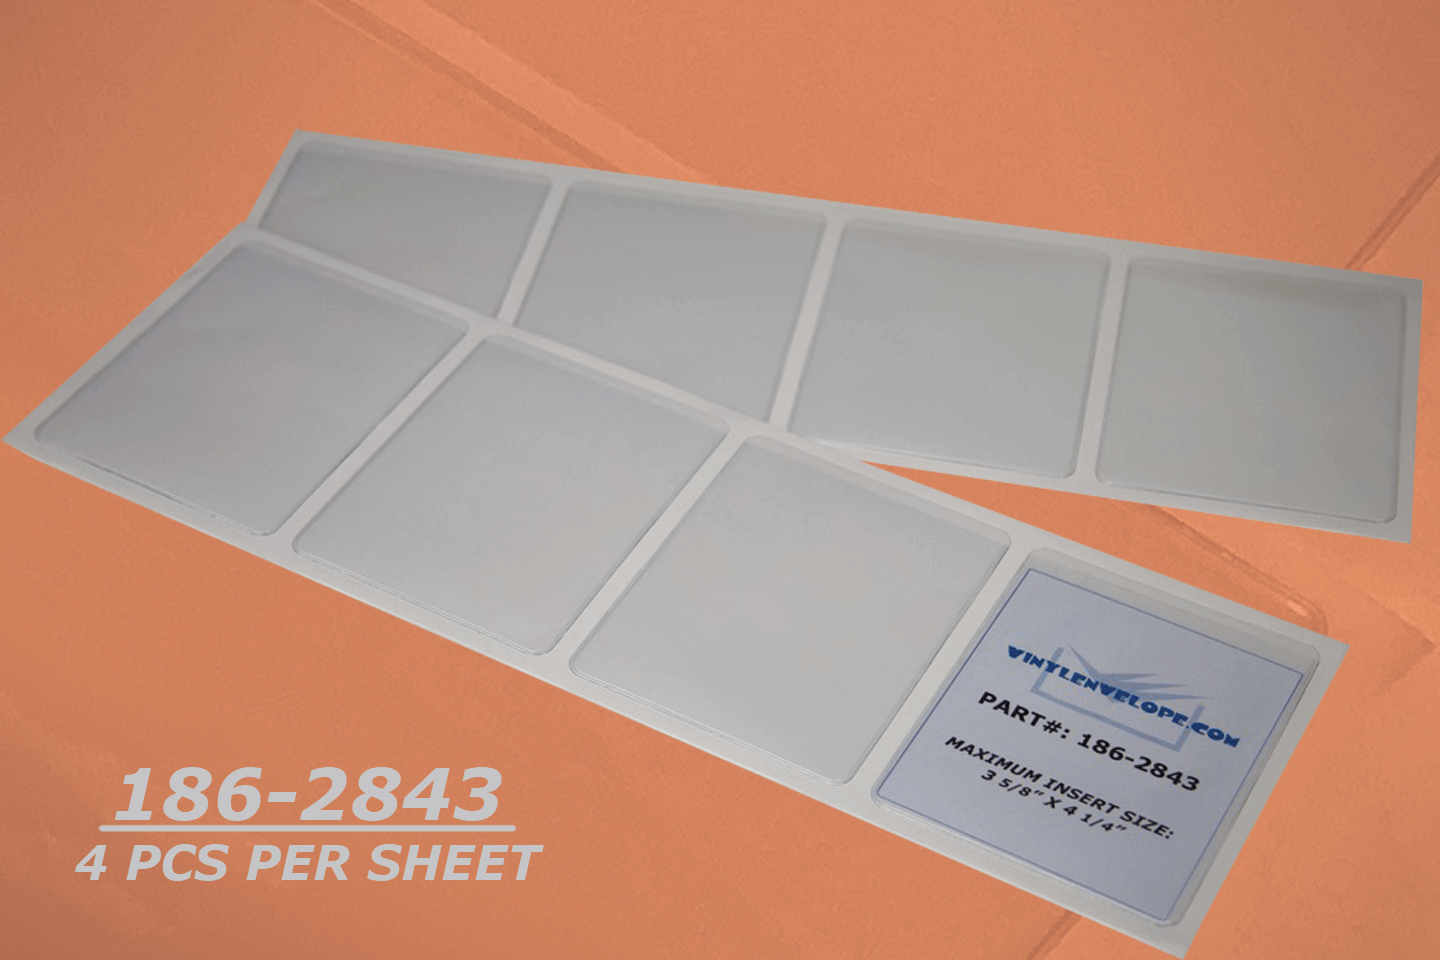 3 7/8" x 4 7/8" Adhesive Pouch